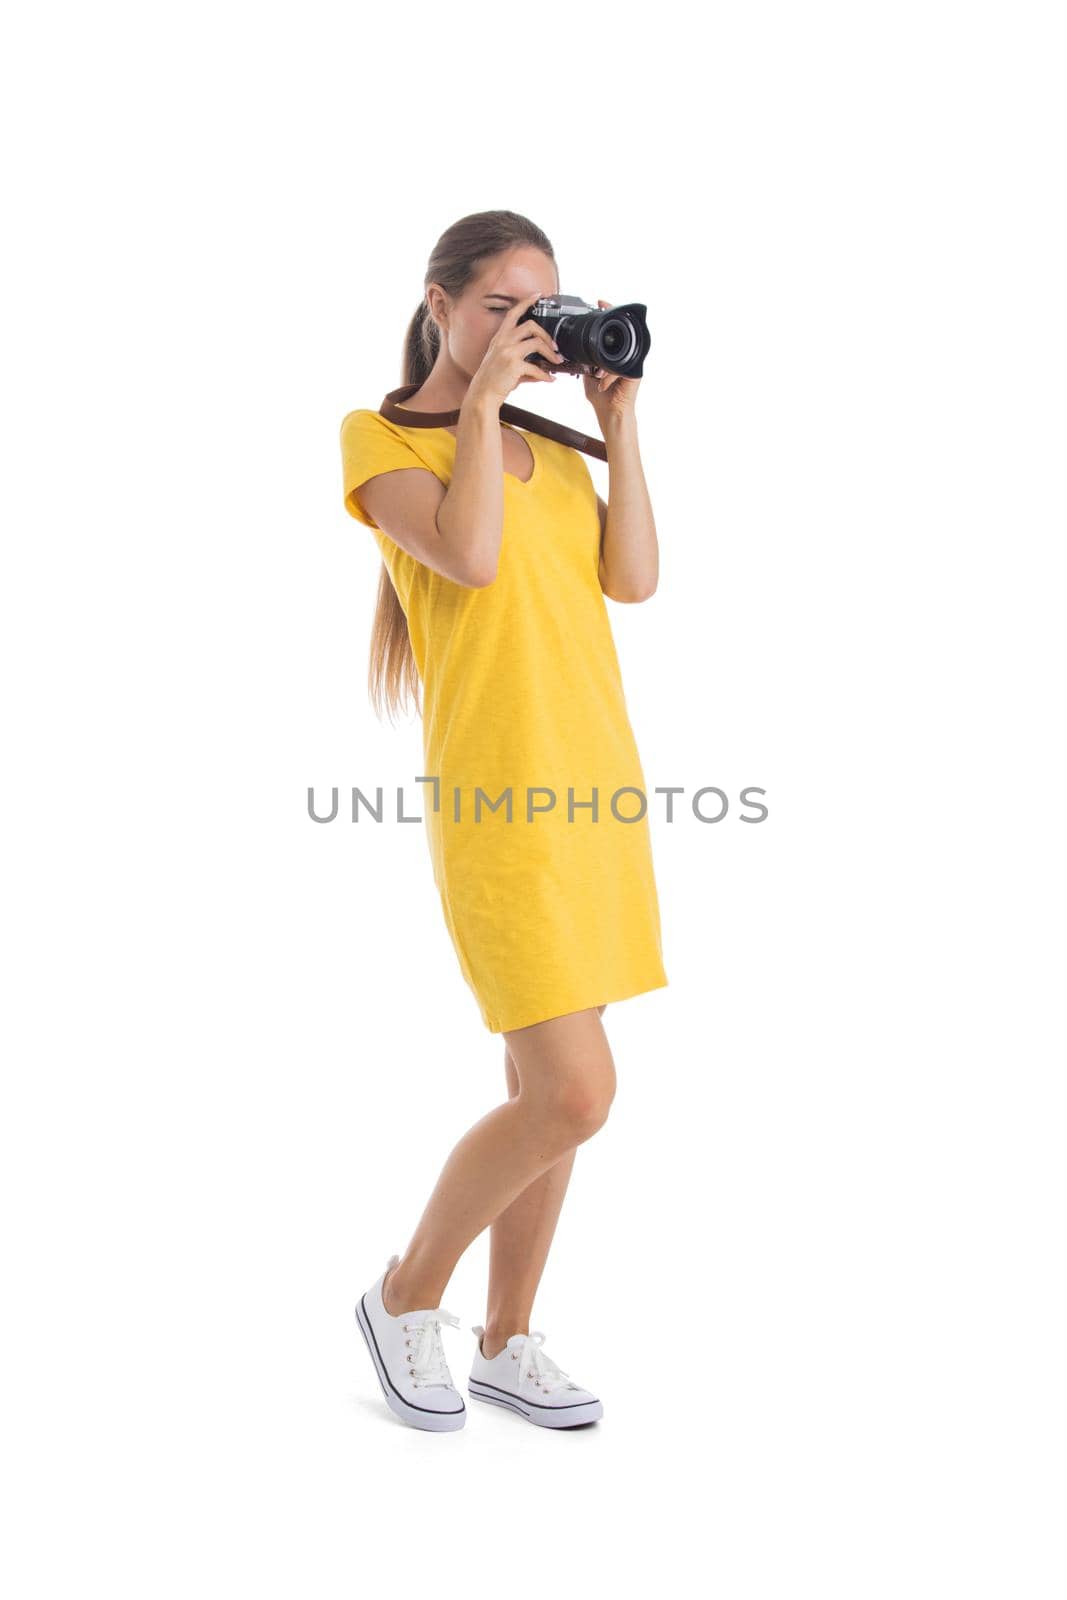 Young woman takes images with photo camera by ALotOfPeople